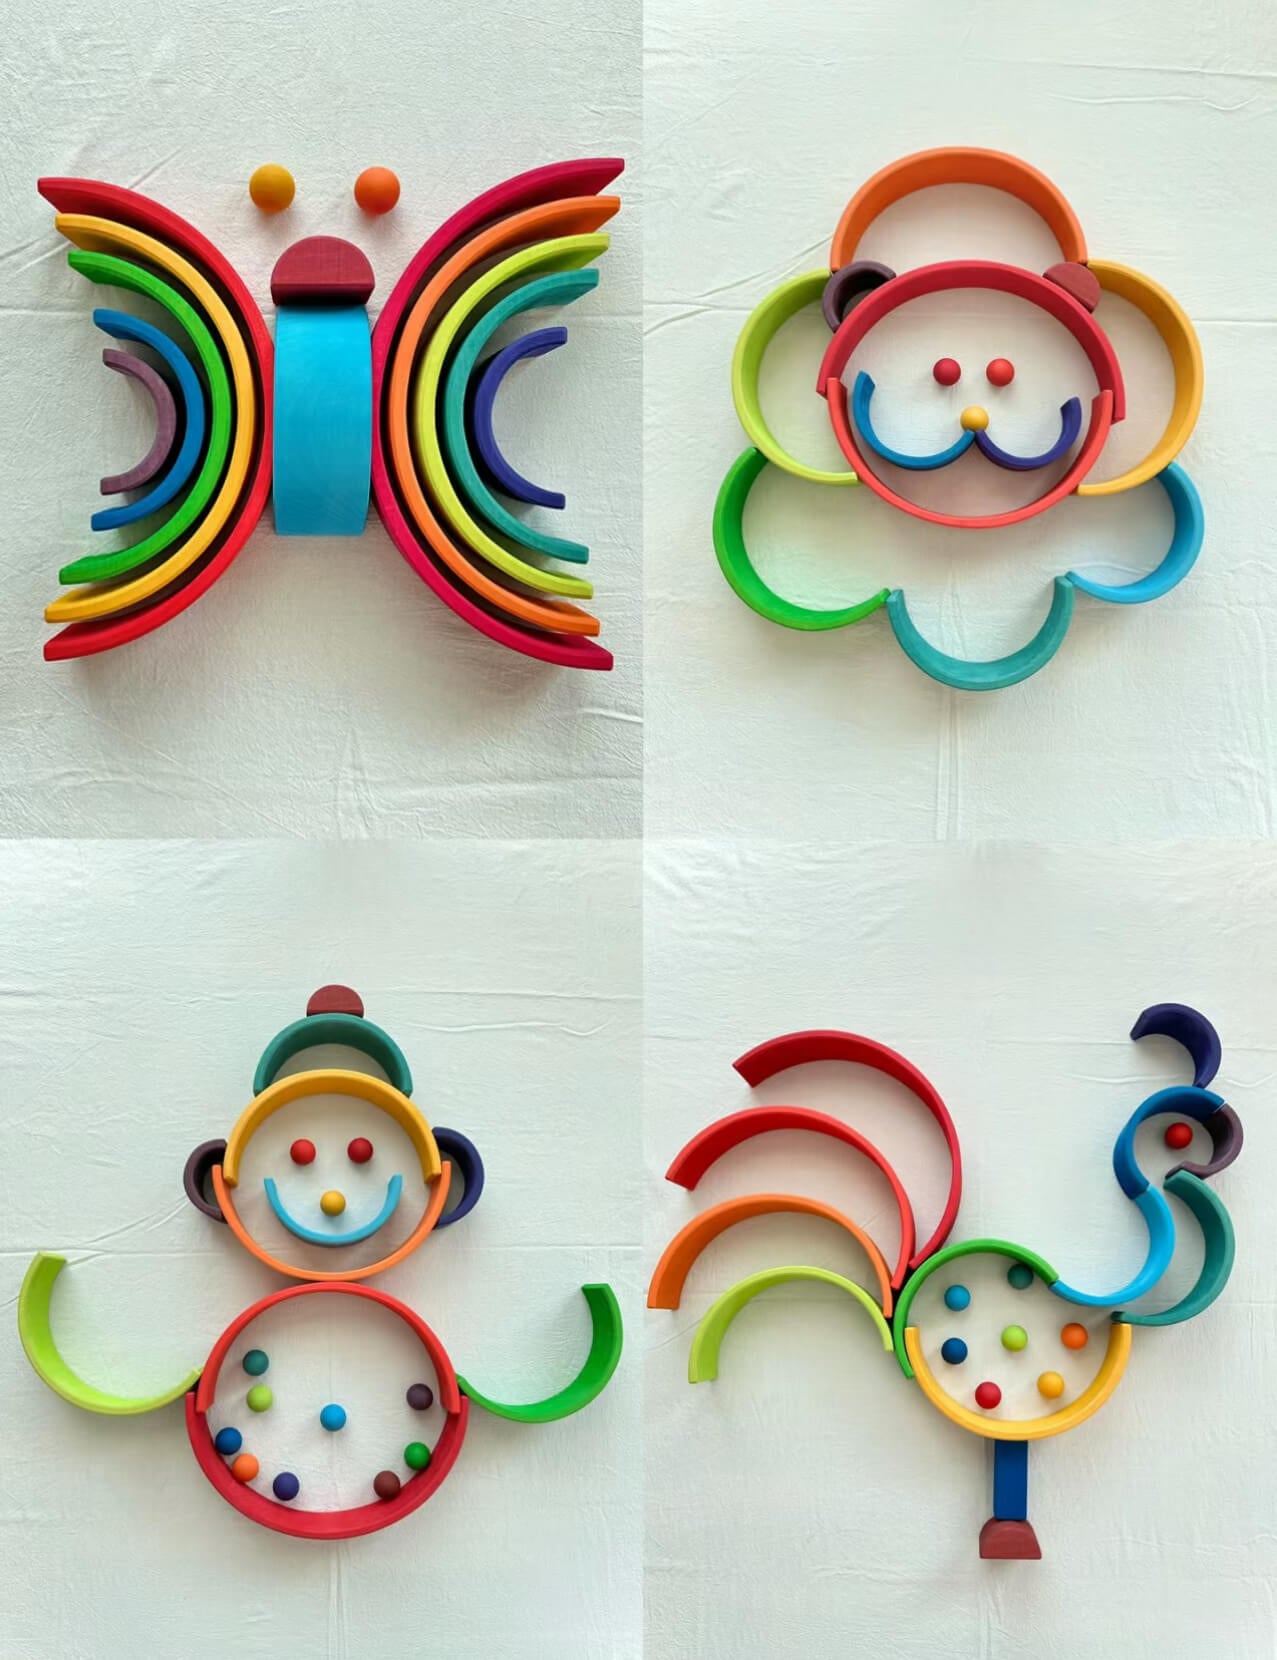 Stacking Ideas with LaLaLull and Grimms Wooden Rainbow Toys